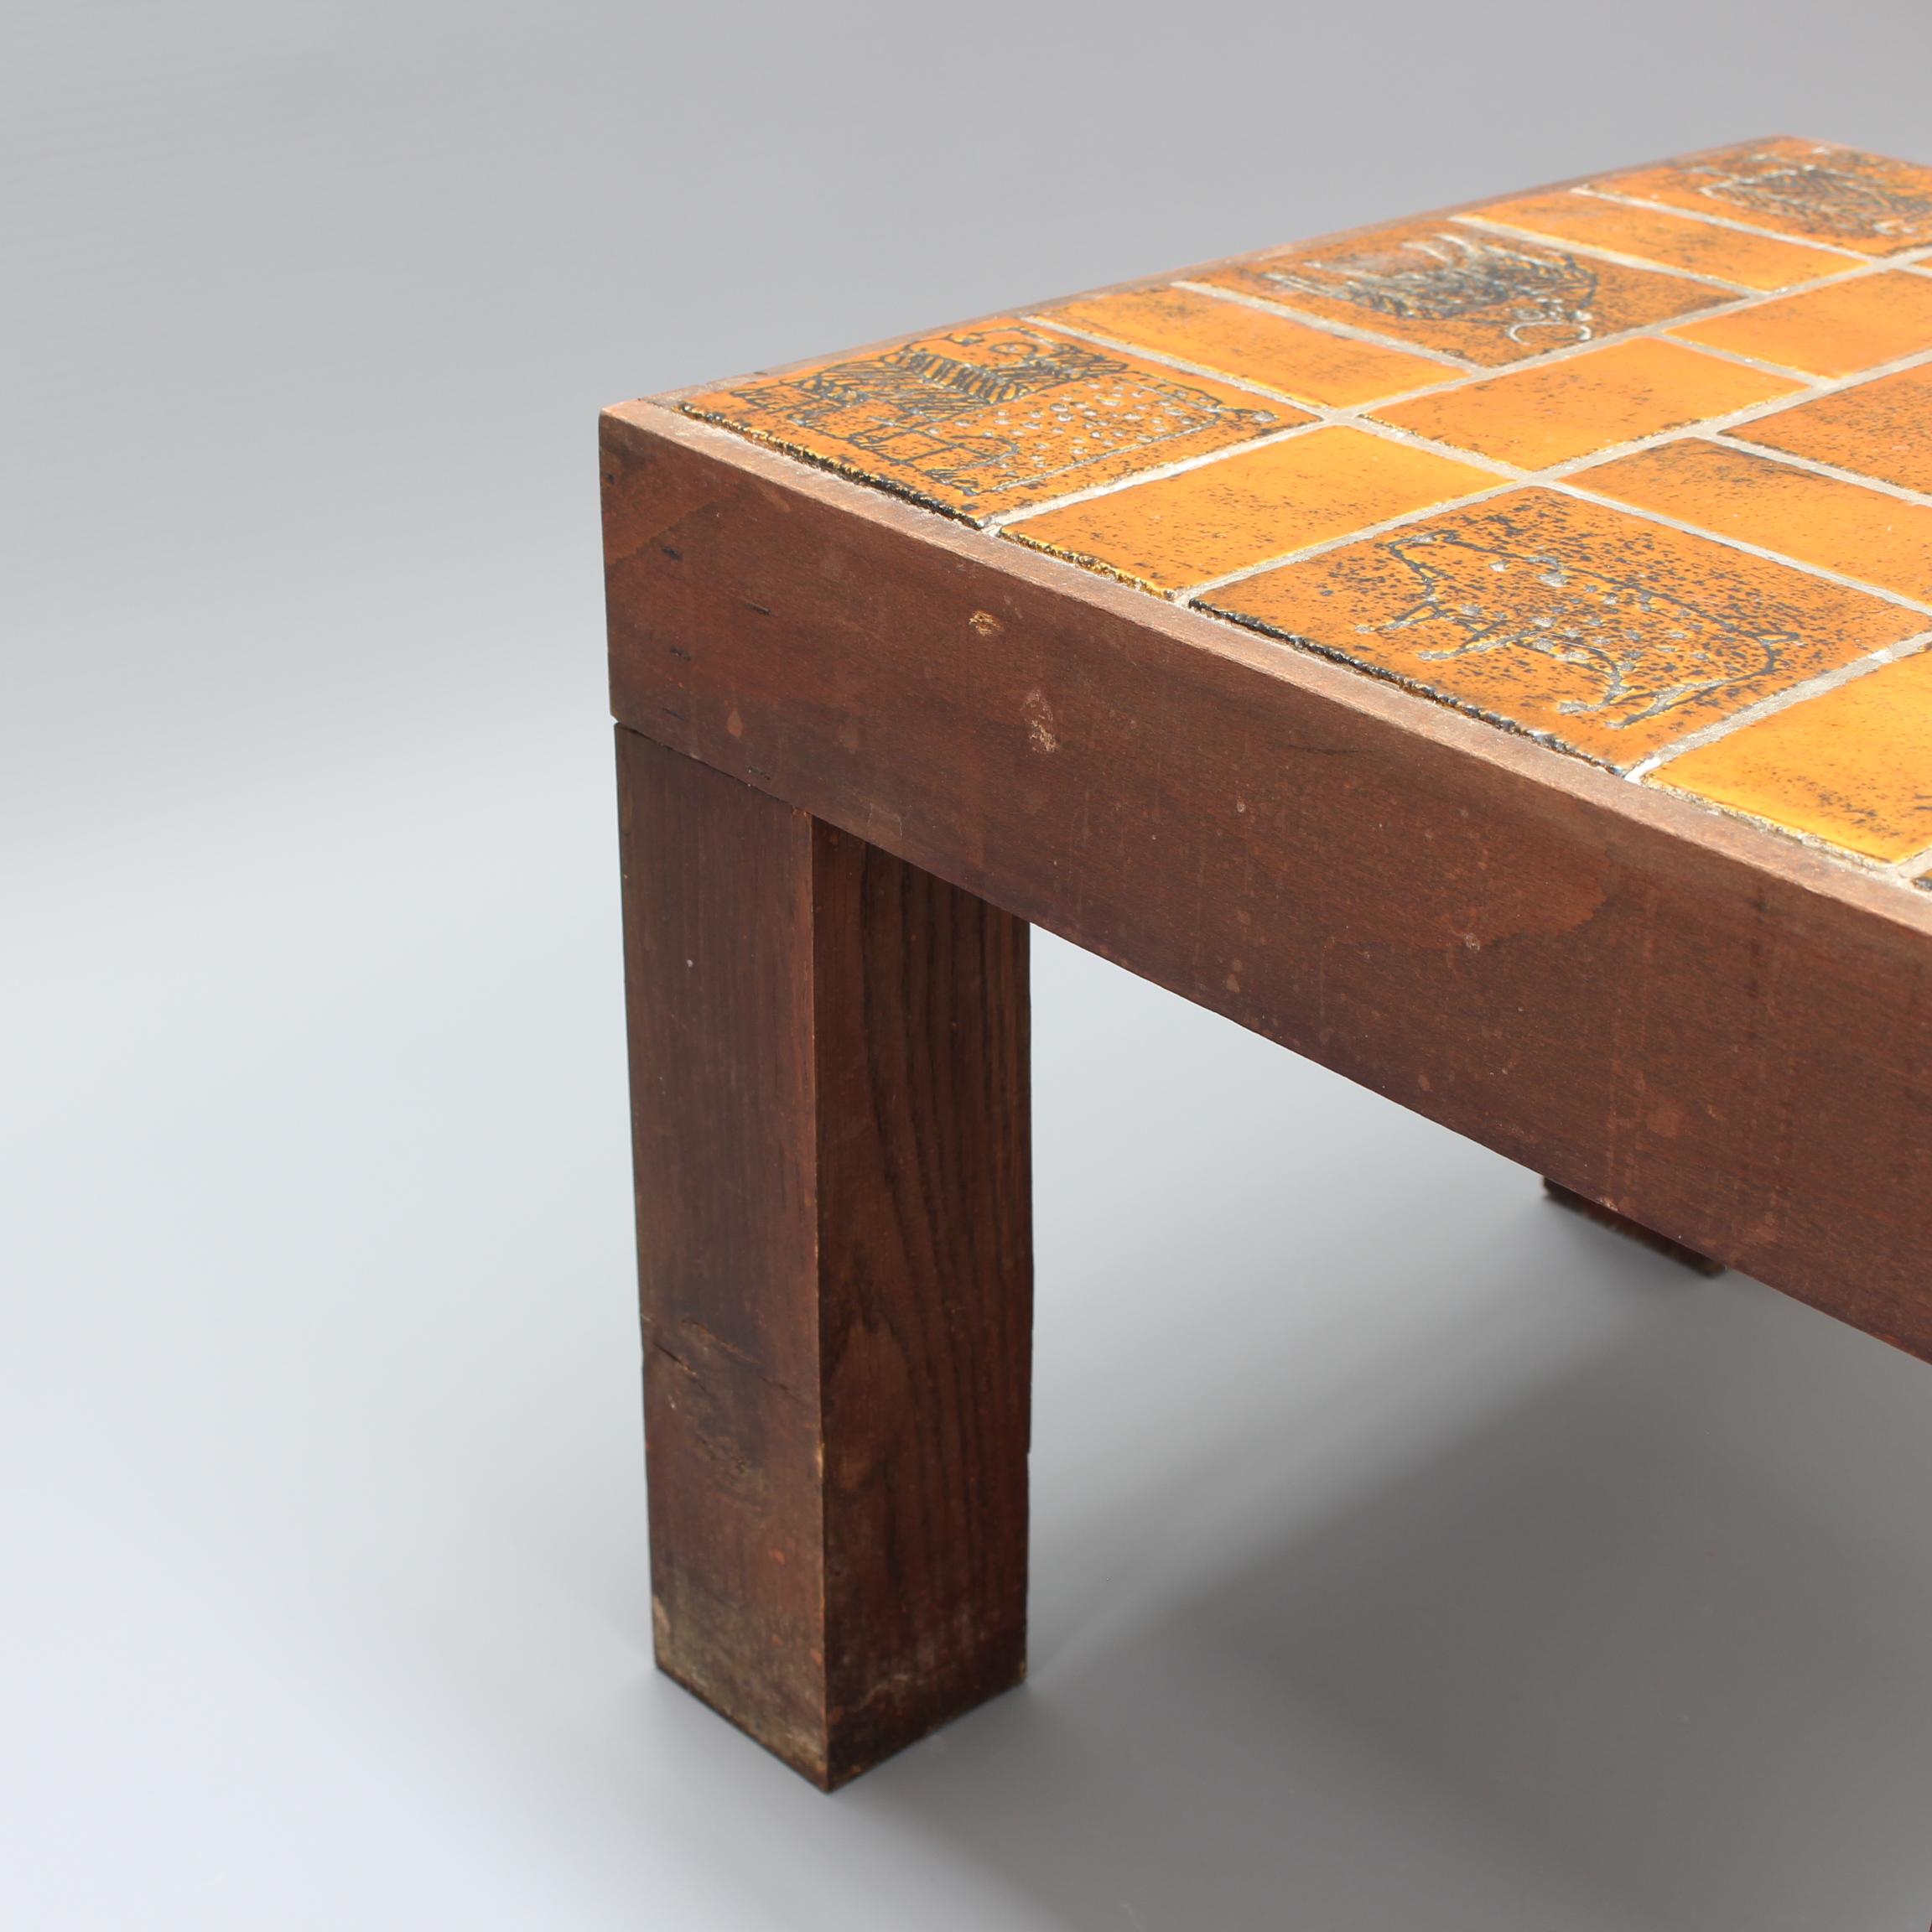 Vintage French Square Side Table with Ceramic Tile Top by Jacques Blin, c. 1950s For Sale 7